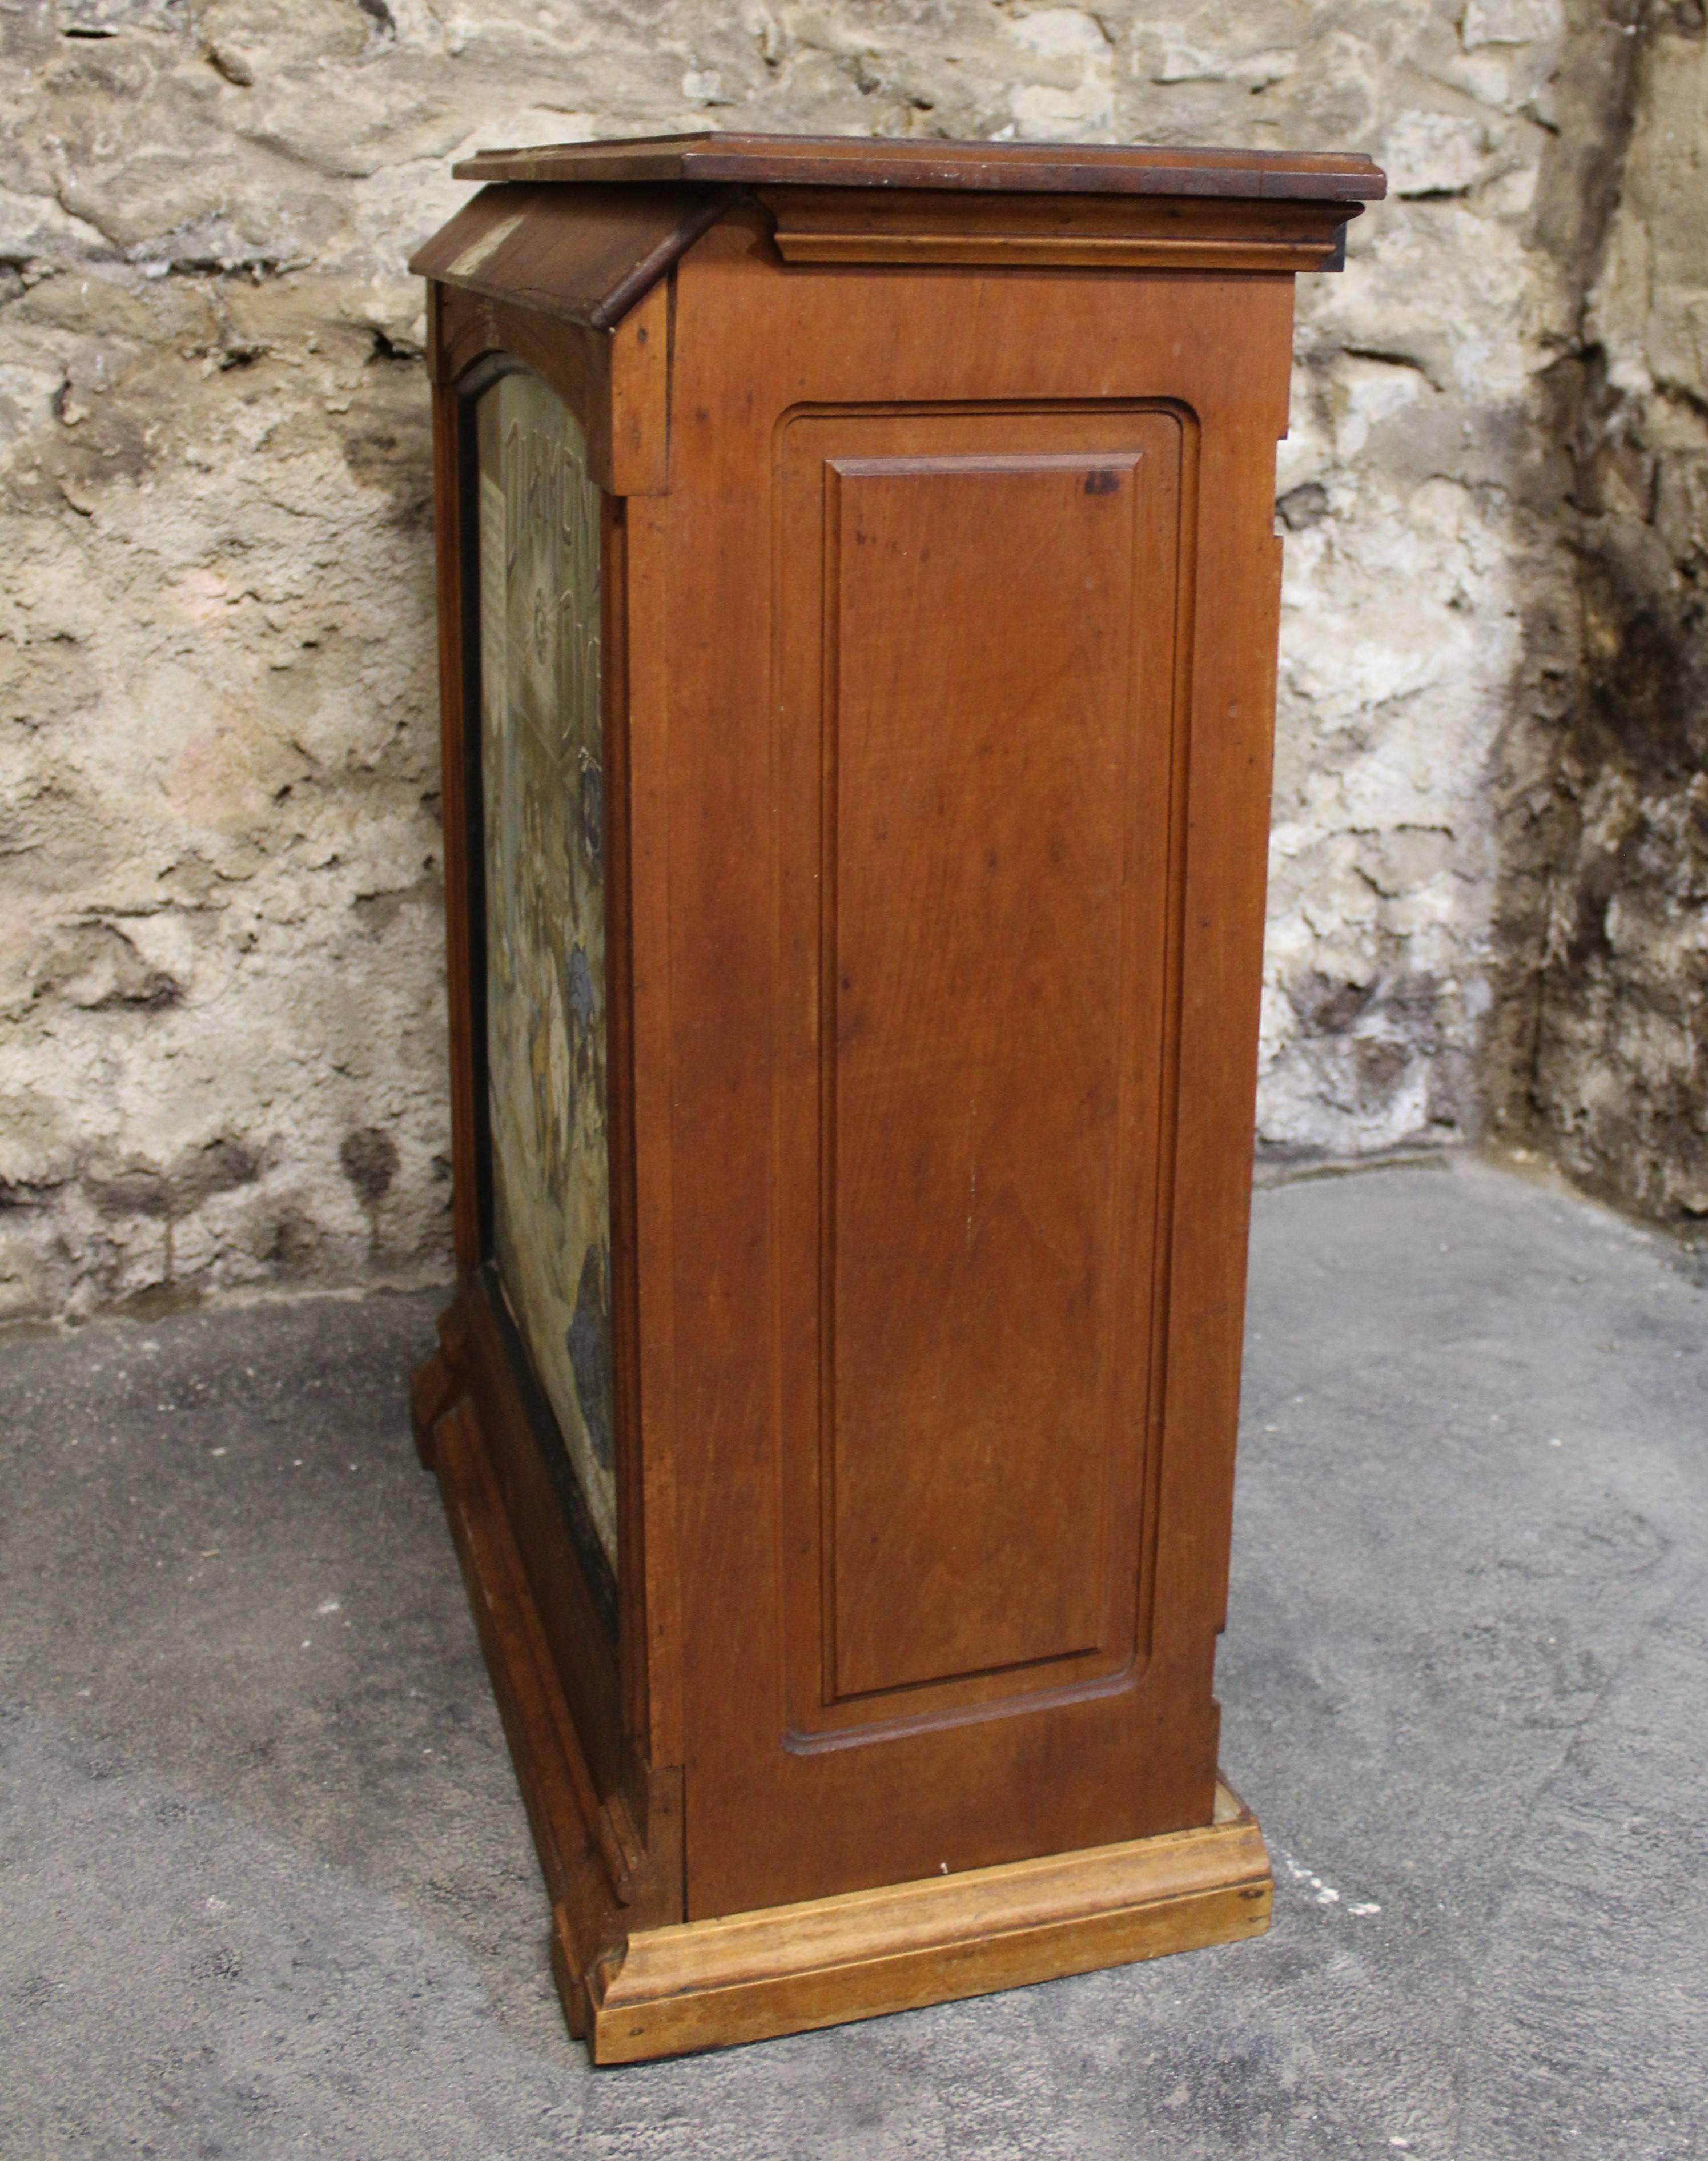 Chromolithograph Diamond Dyes tin panel and birch retail counter cabinet, with slotted interior.